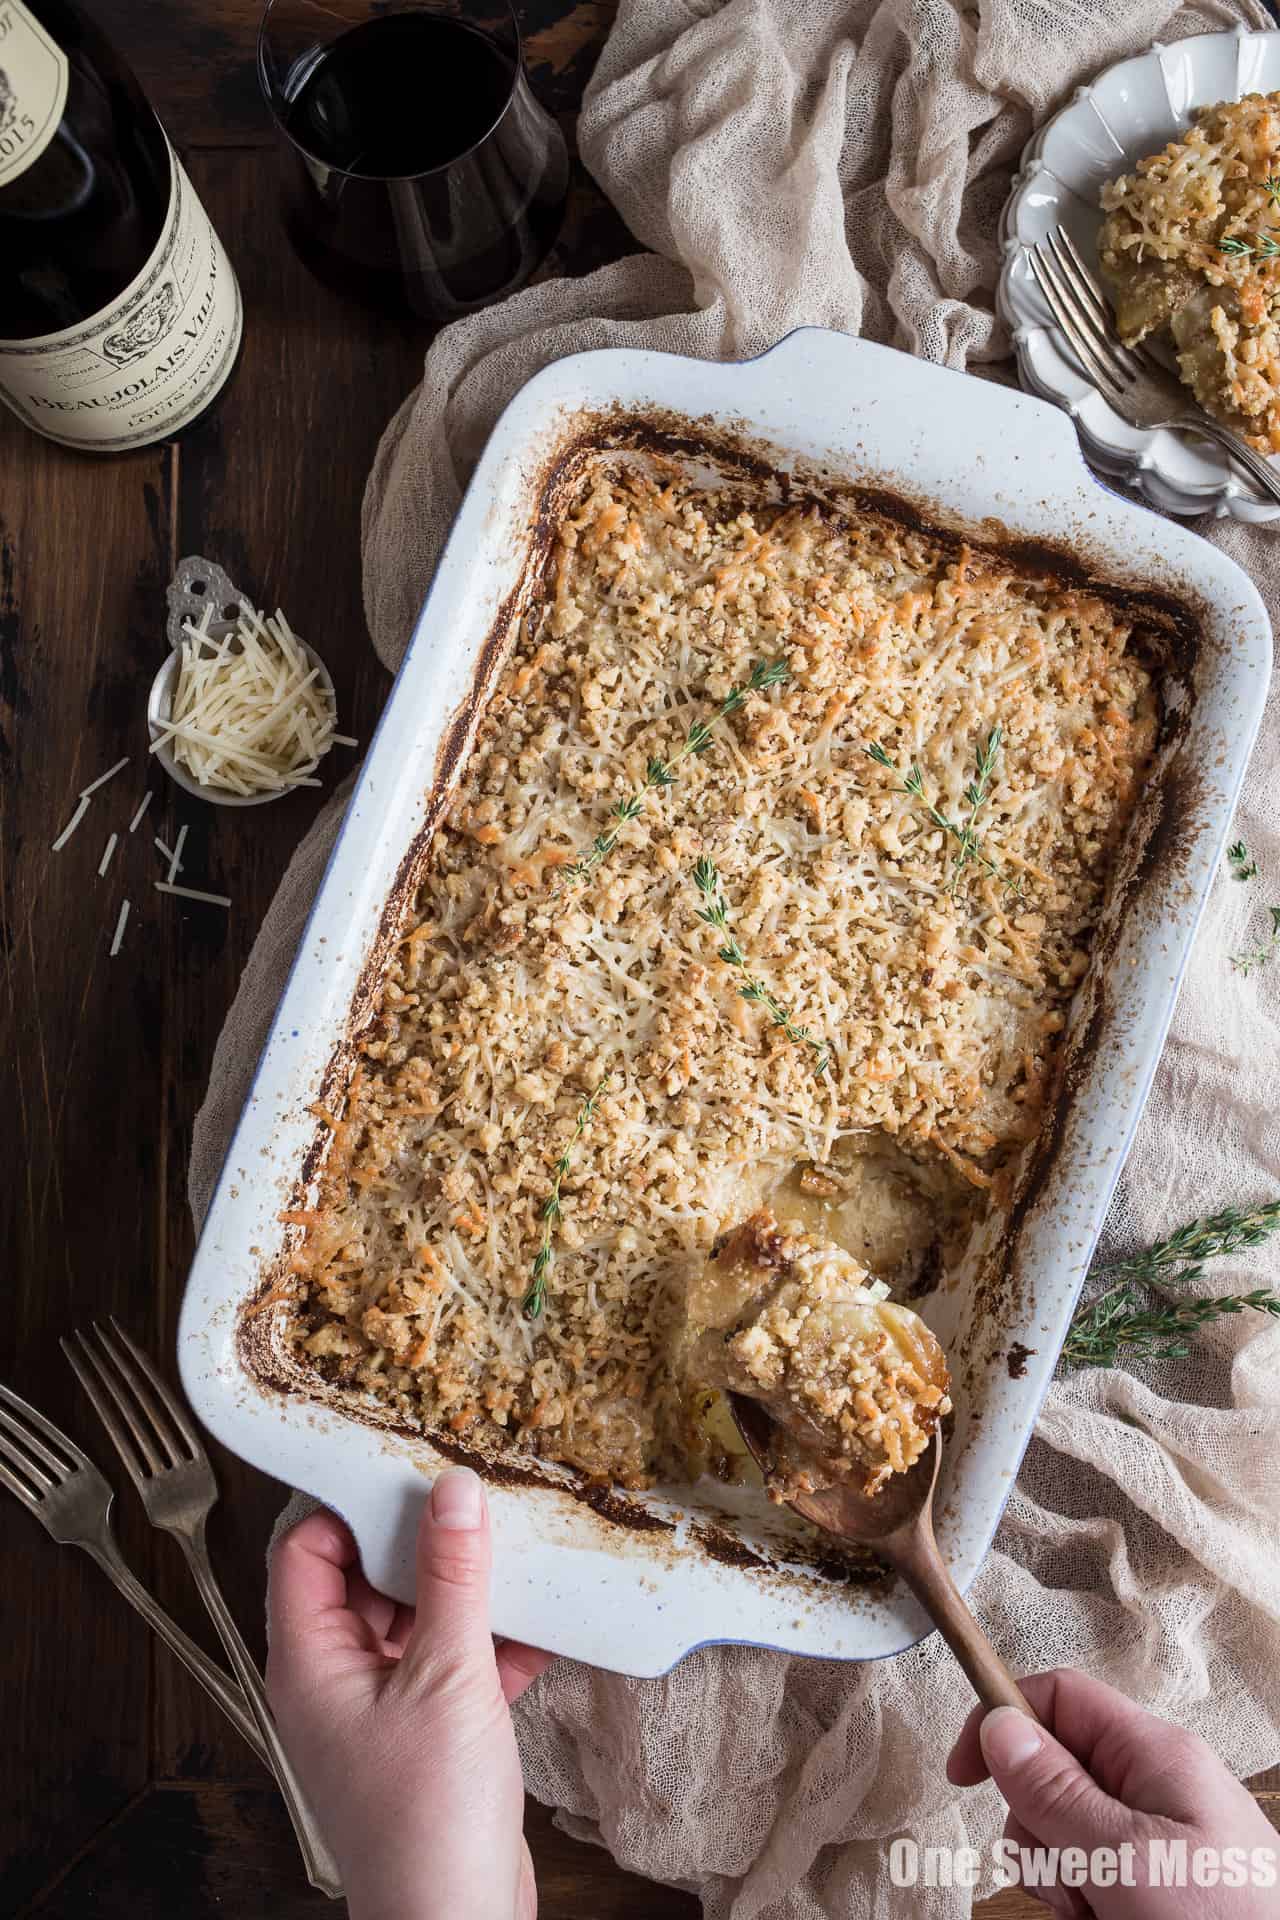 Potato Leek Gratin: This creamy spring side dish is loaded with cheese and topped with a toasted walnut crumble.